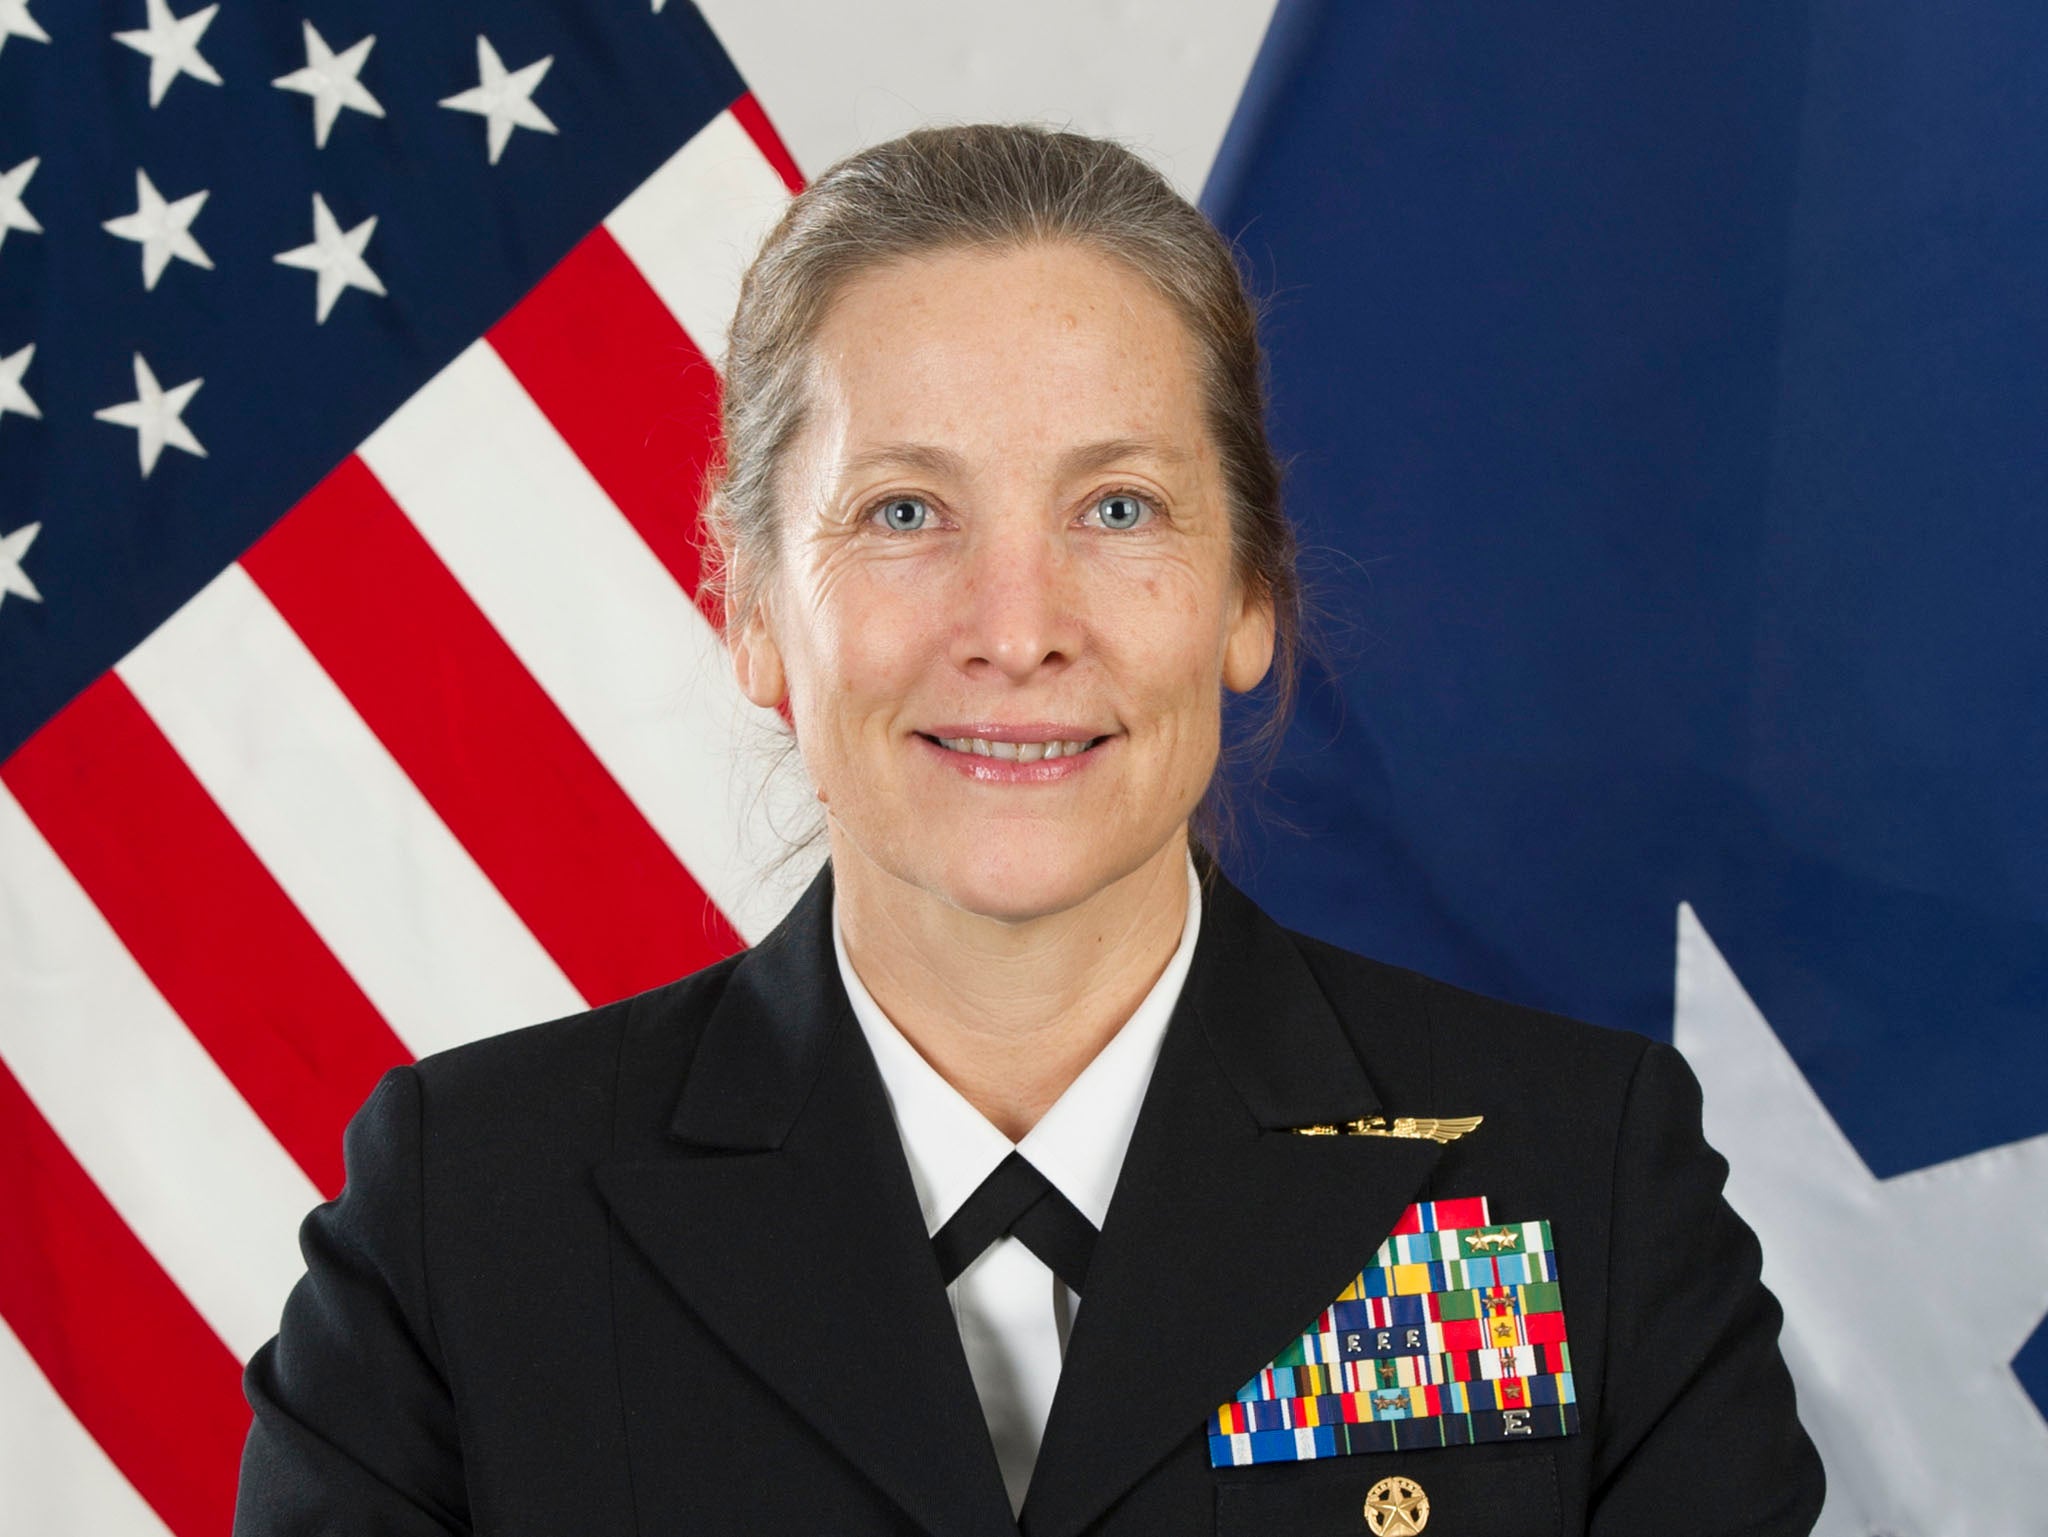 Rear Admiral Shoshana Chatfield, who heads a military command in Guam, will be the first female leader of the US Naval War College